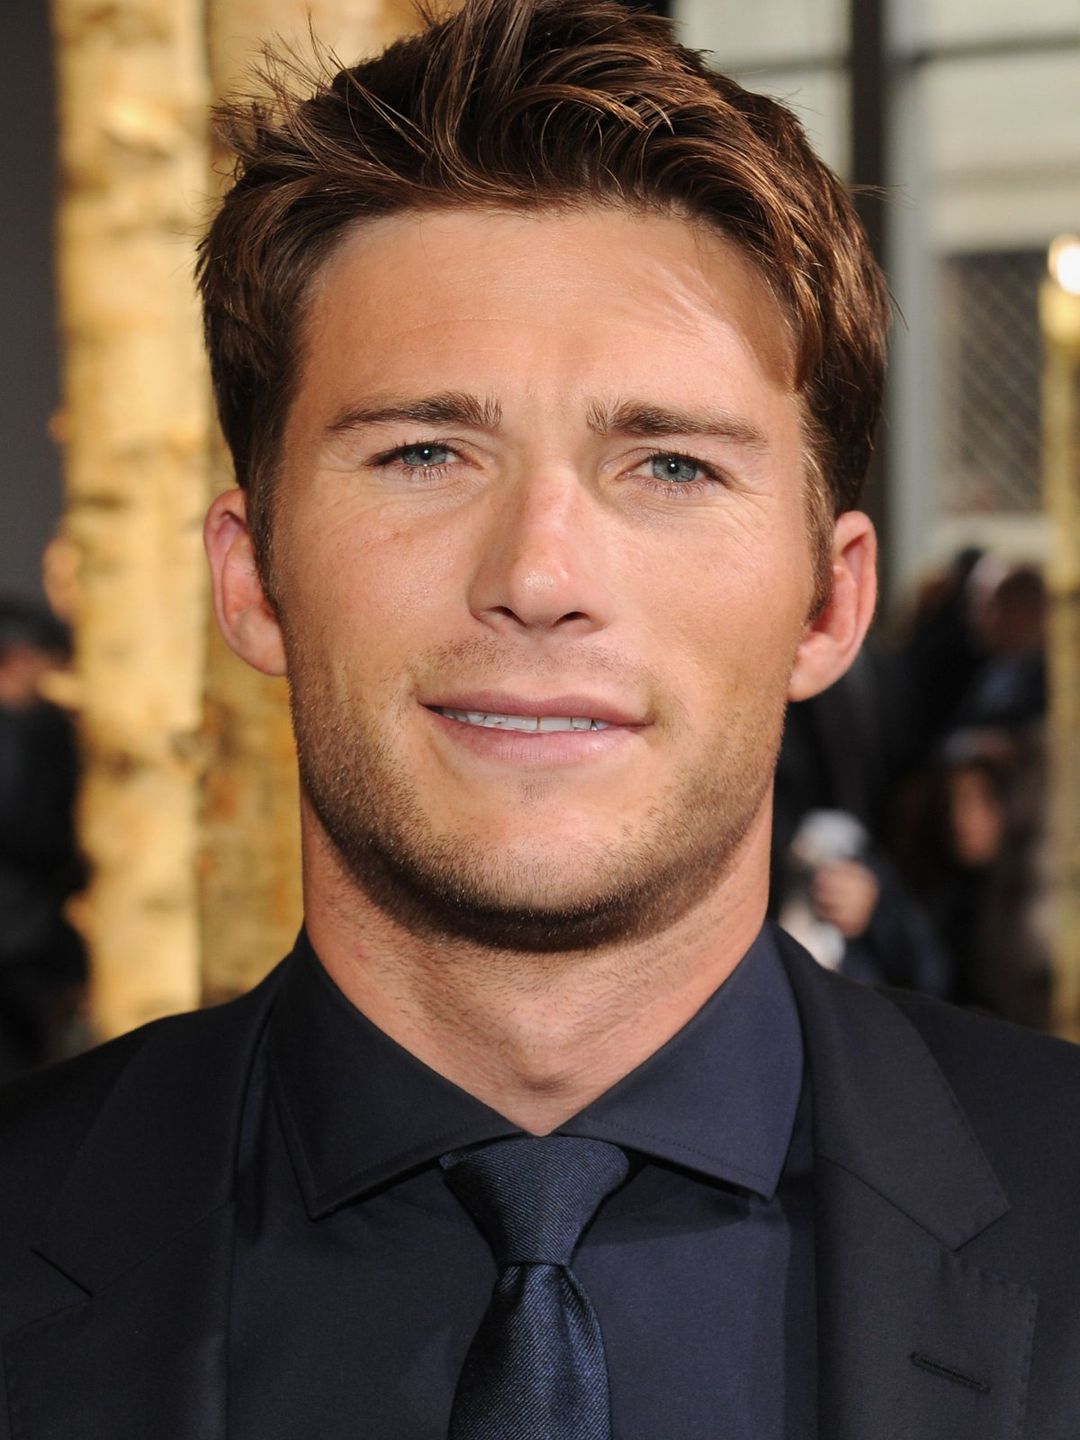 Scott Eastwood in his youth